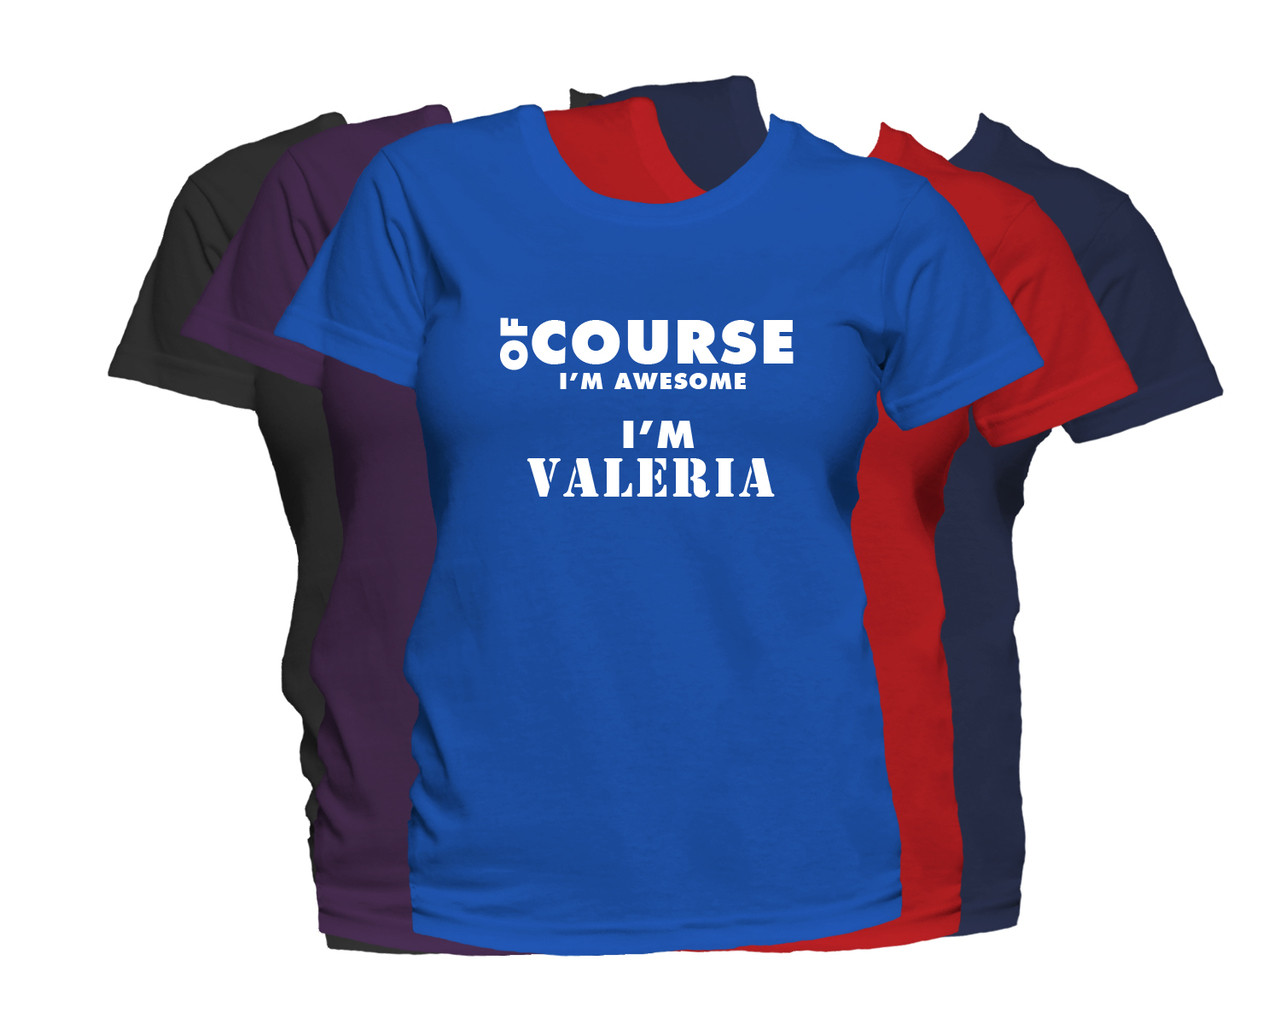 VALERIA First Name T Shirt Of Course I'm Awesome Personalized Custom  Women's First Name Shirt - Fat Duck Tees